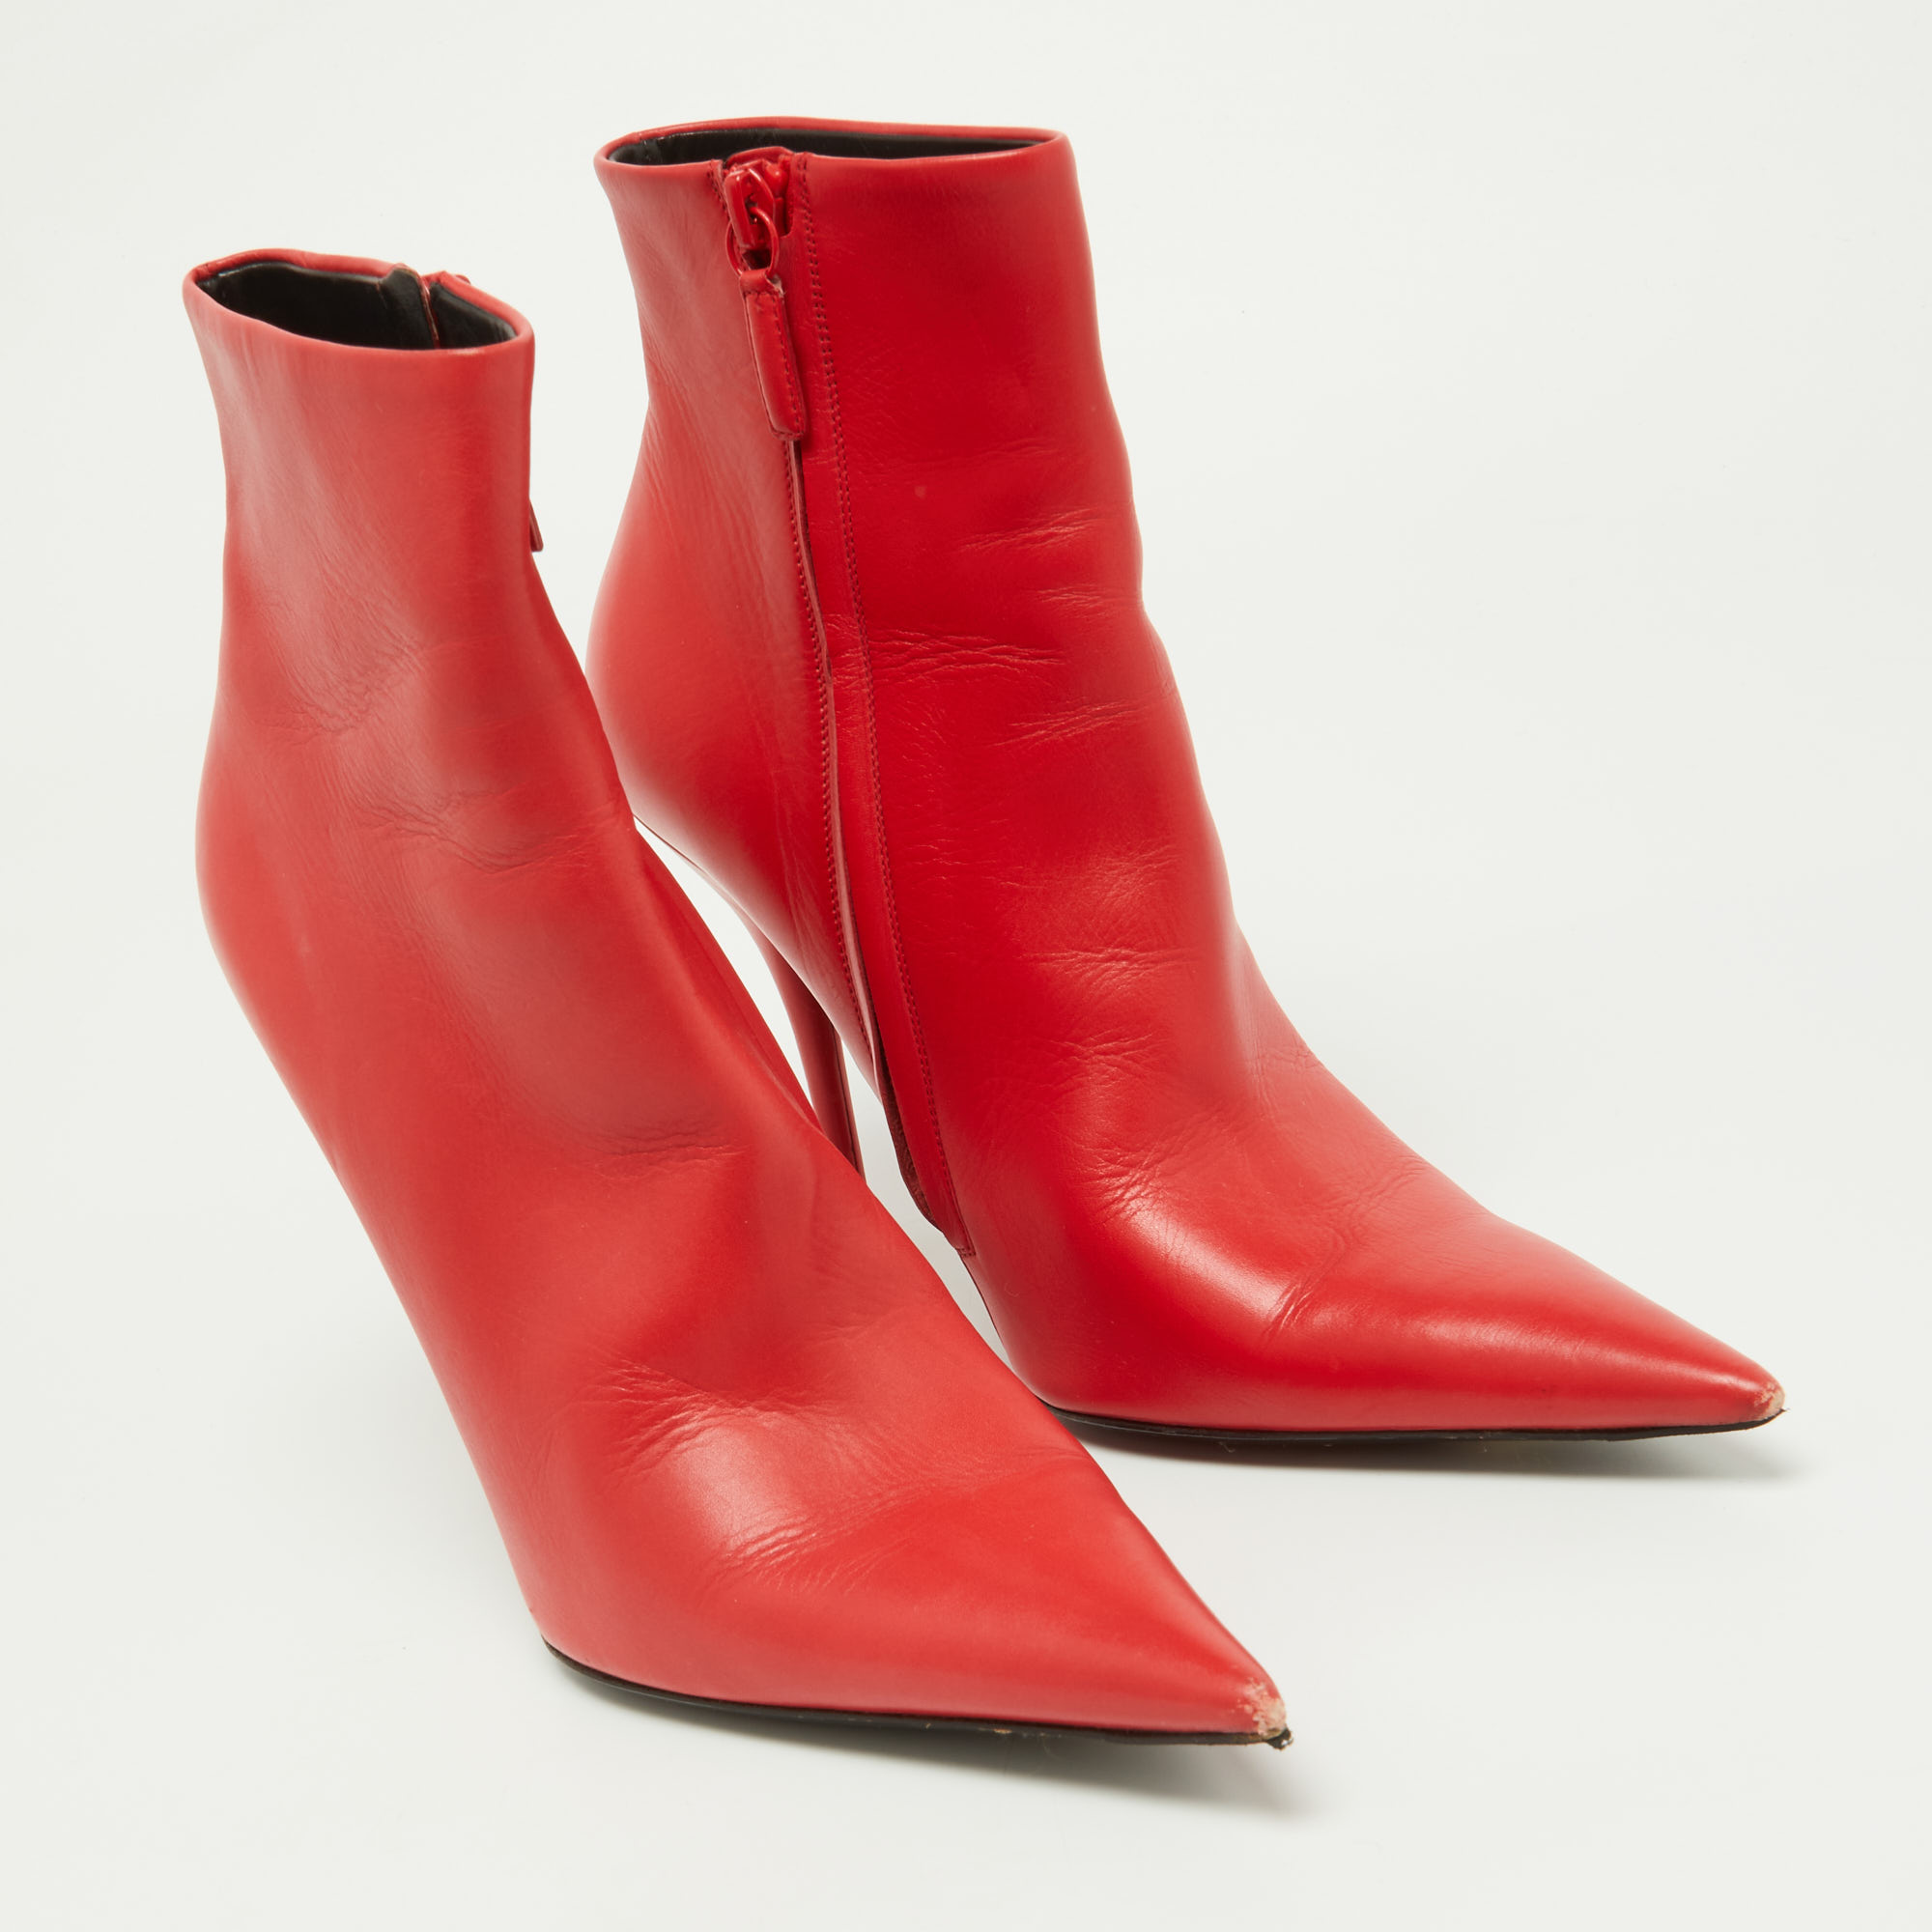 Balenciaga Red Leather Knife Ankle Booties Size 38.5